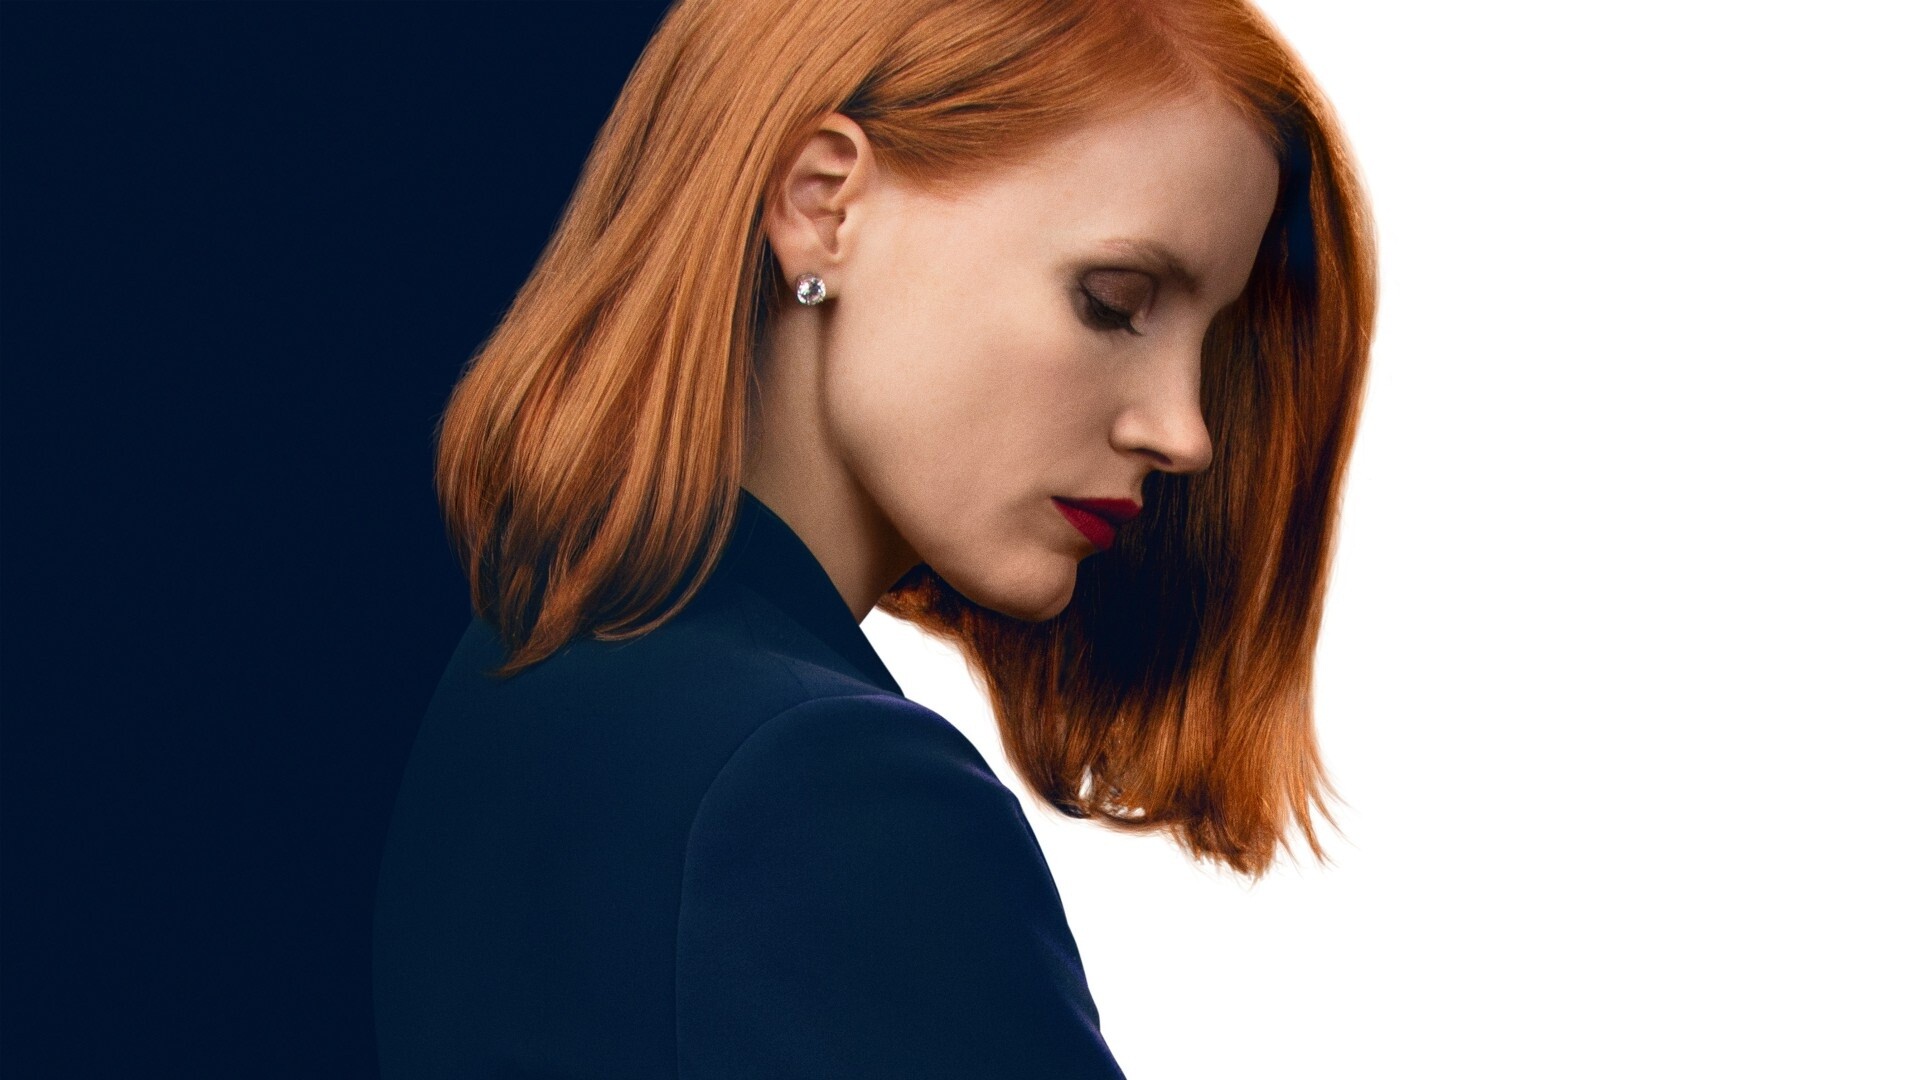 Jessica Chastain: Played Maggie Beauford in a 2012 American crime drama film, Lawless. 1920x1080 Full HD Background.